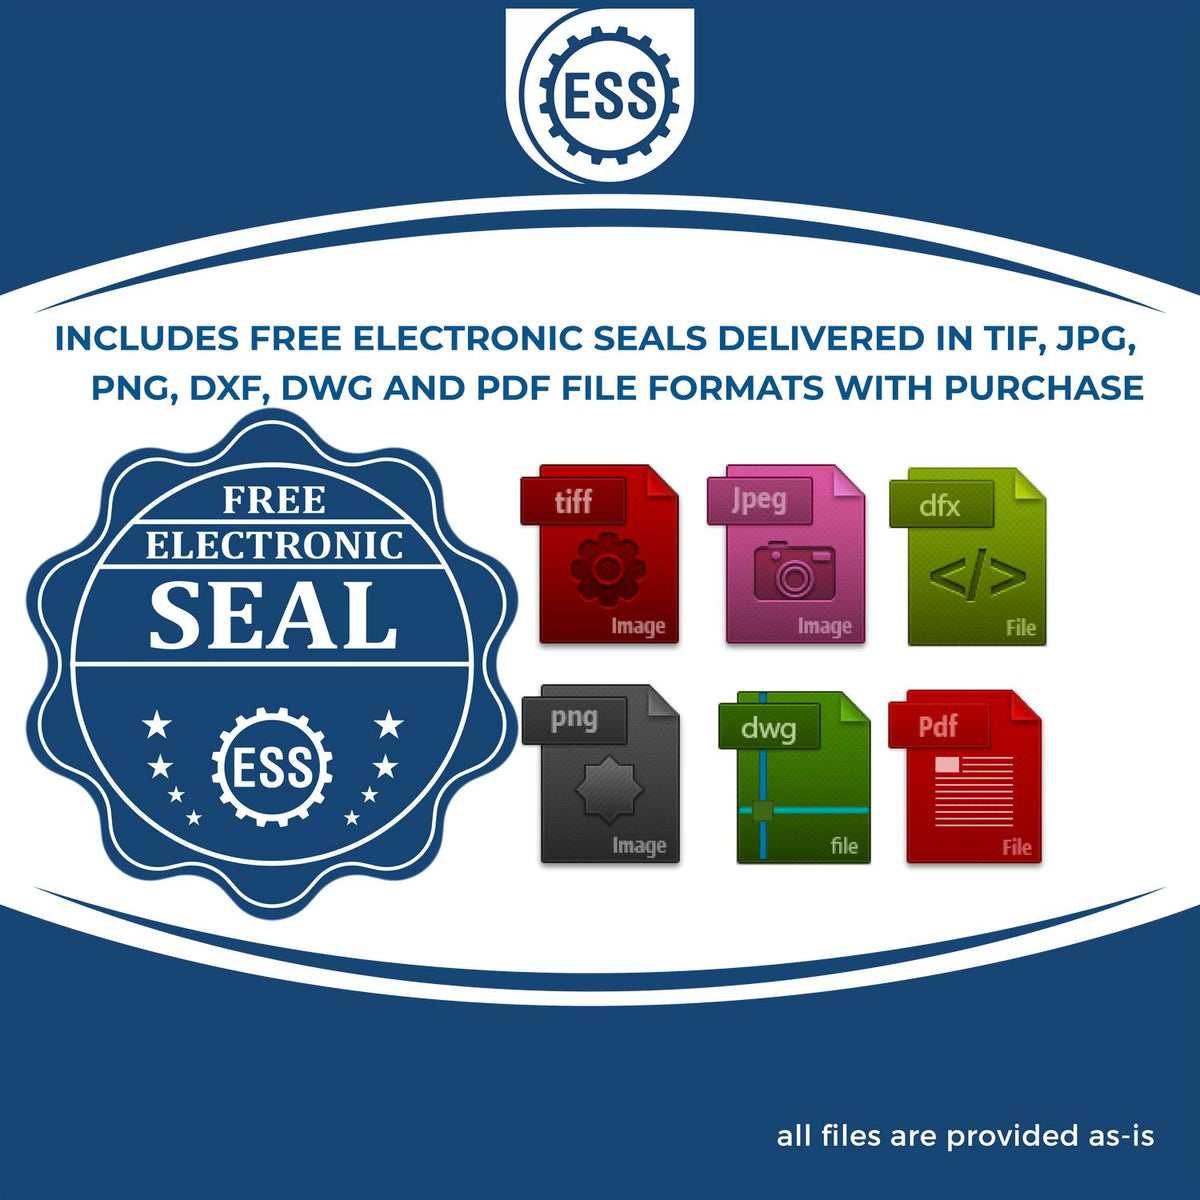 An infographic for the free electronic seal for the Gift North Dakota Engineer Seal illustrating the different file type icons such as DXF, DWG, TIF, JPG and PNG.